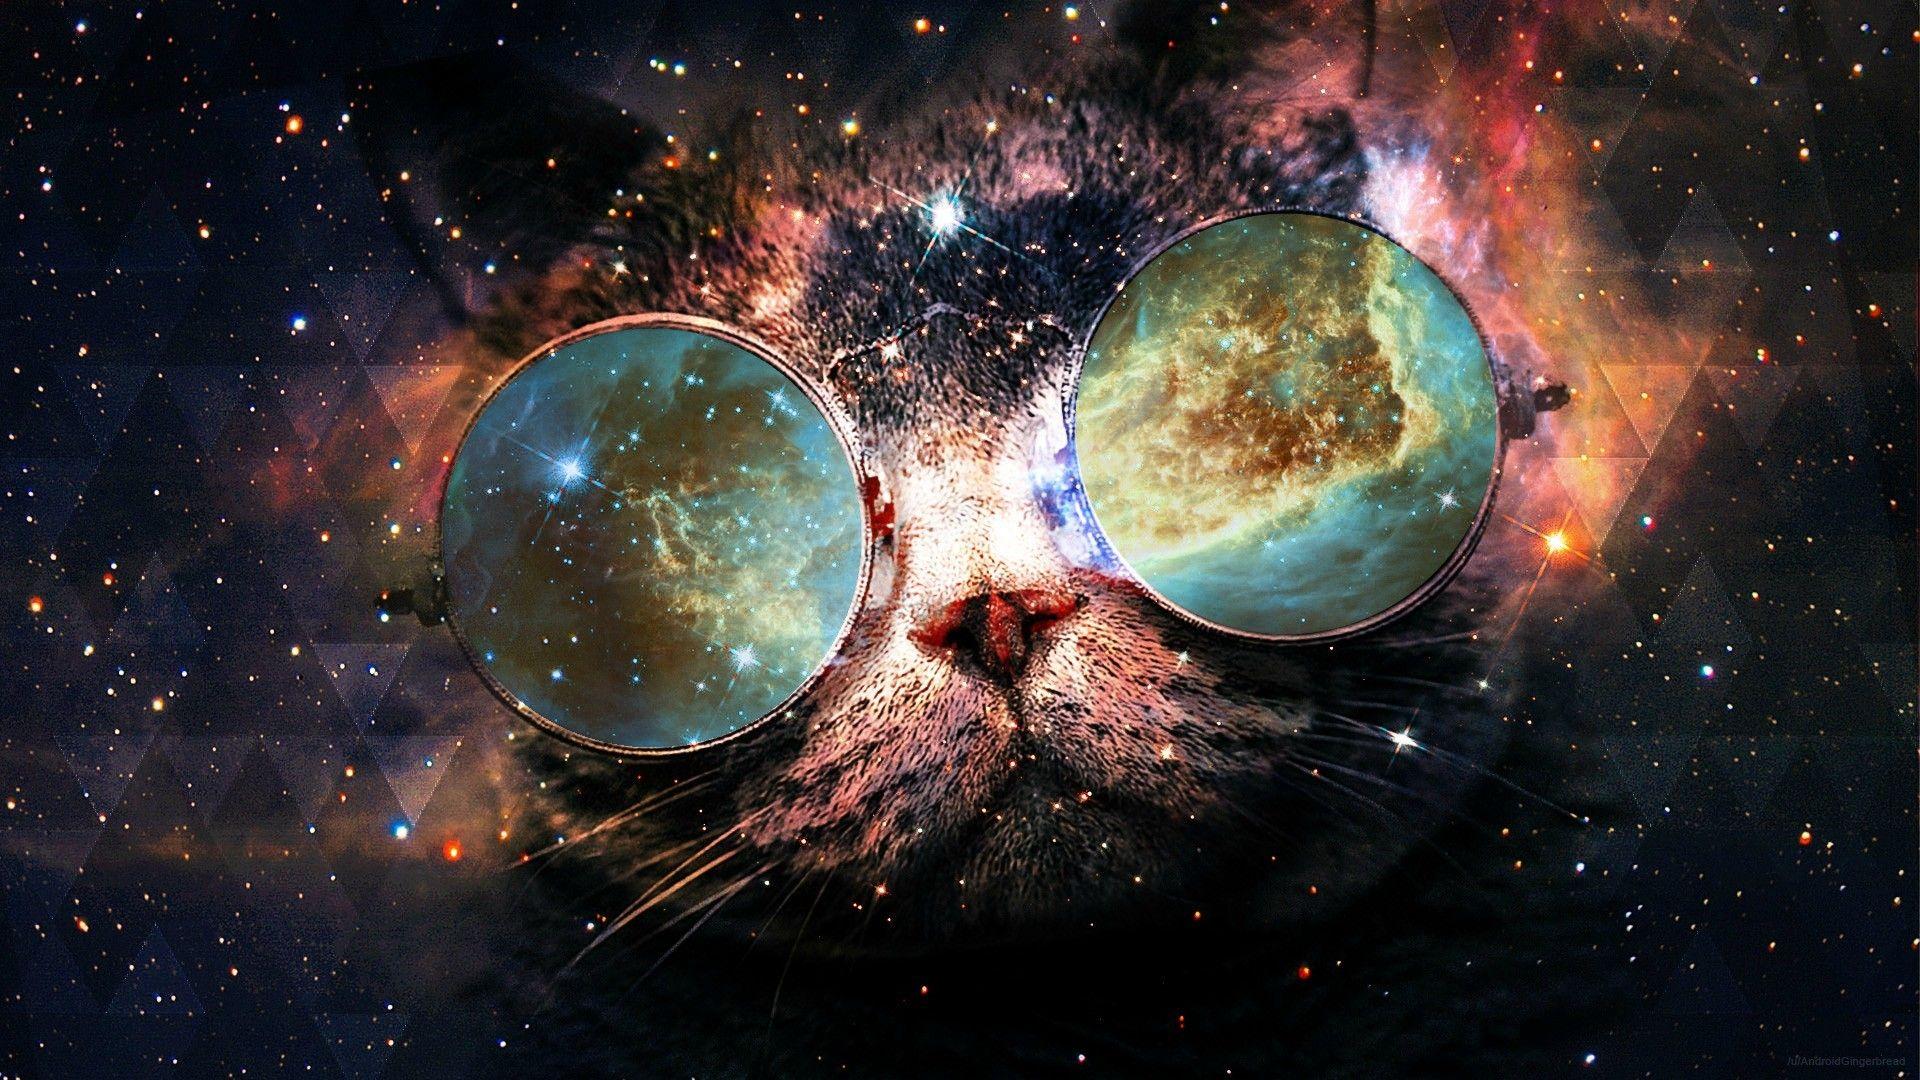 Cats in Space Wallpapers - Top Free Cats in Space Backgrounds